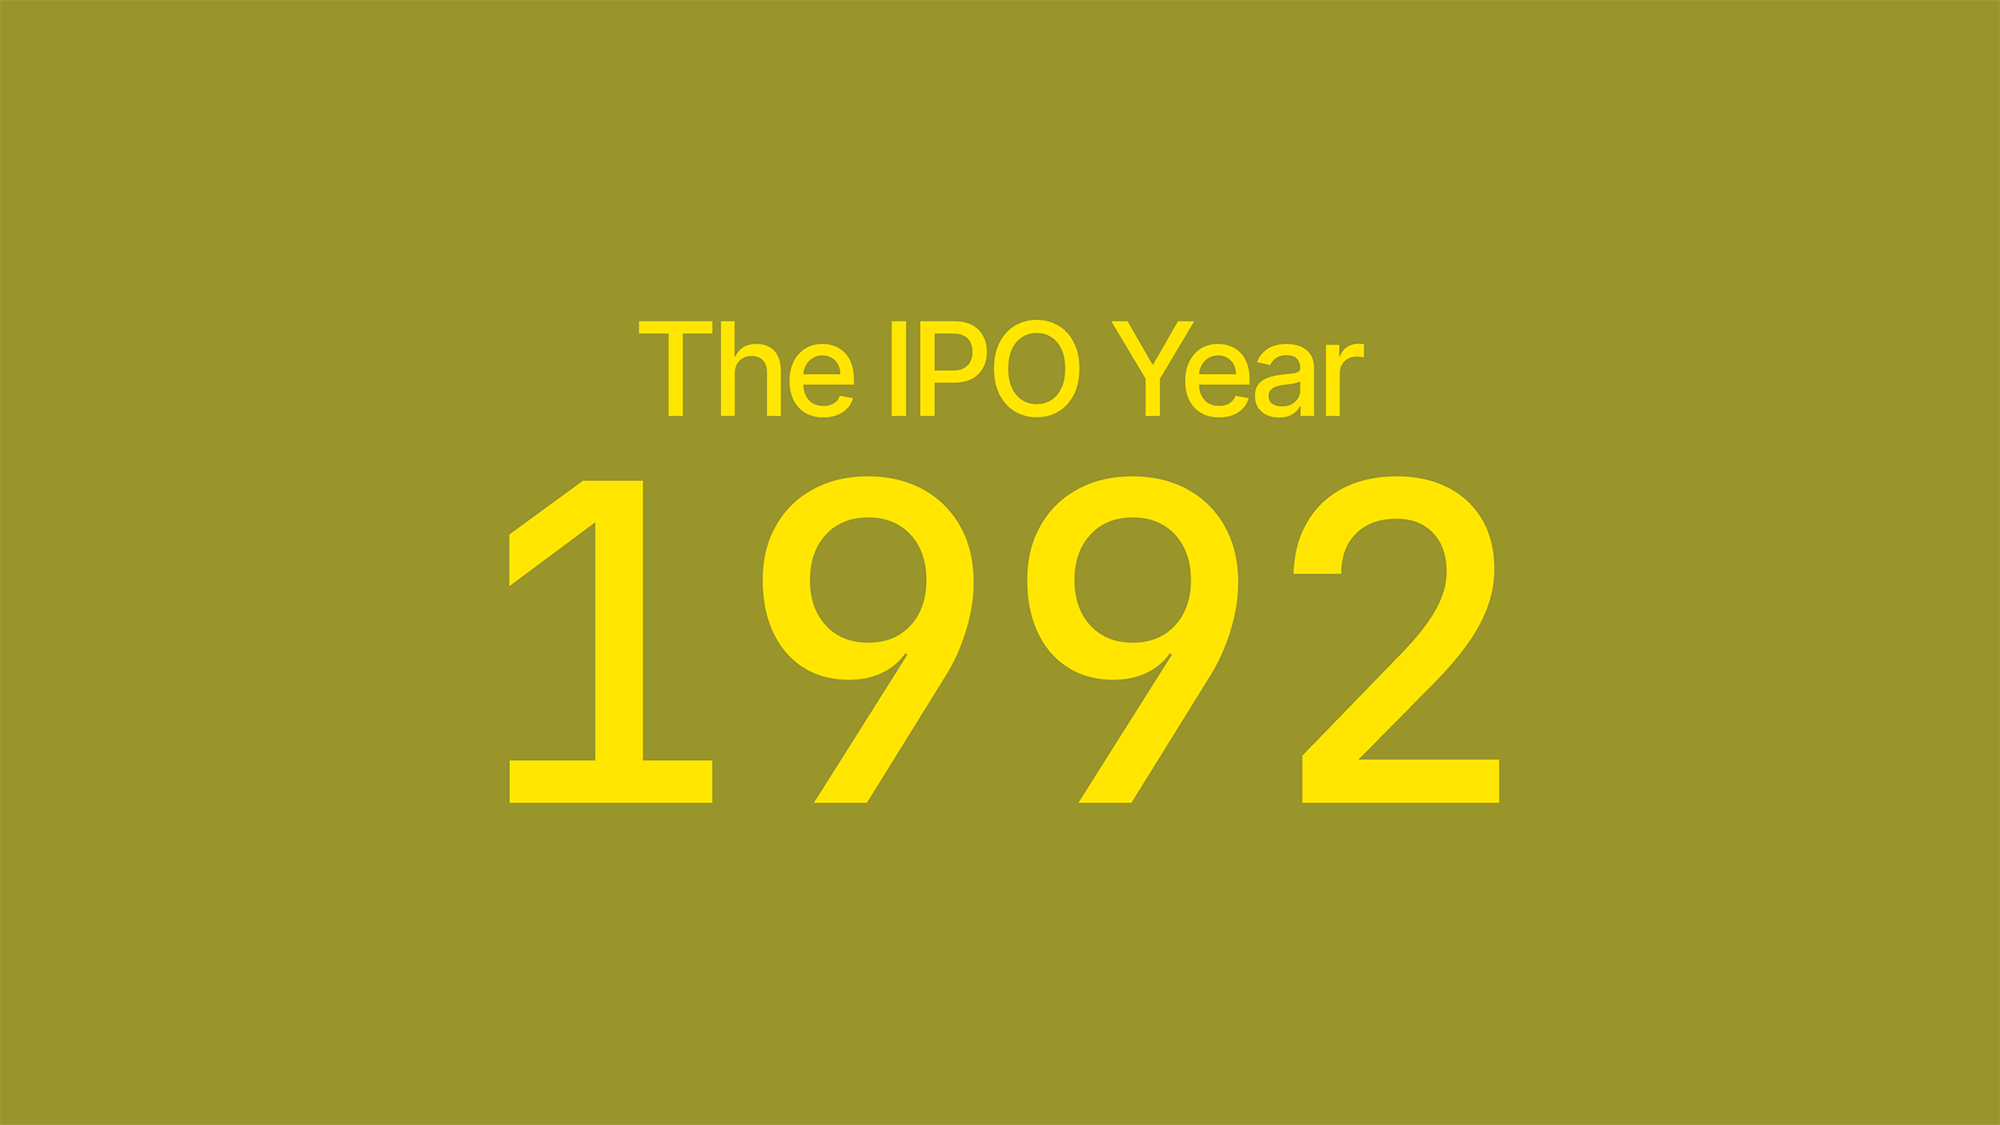 The IPO Year 1992